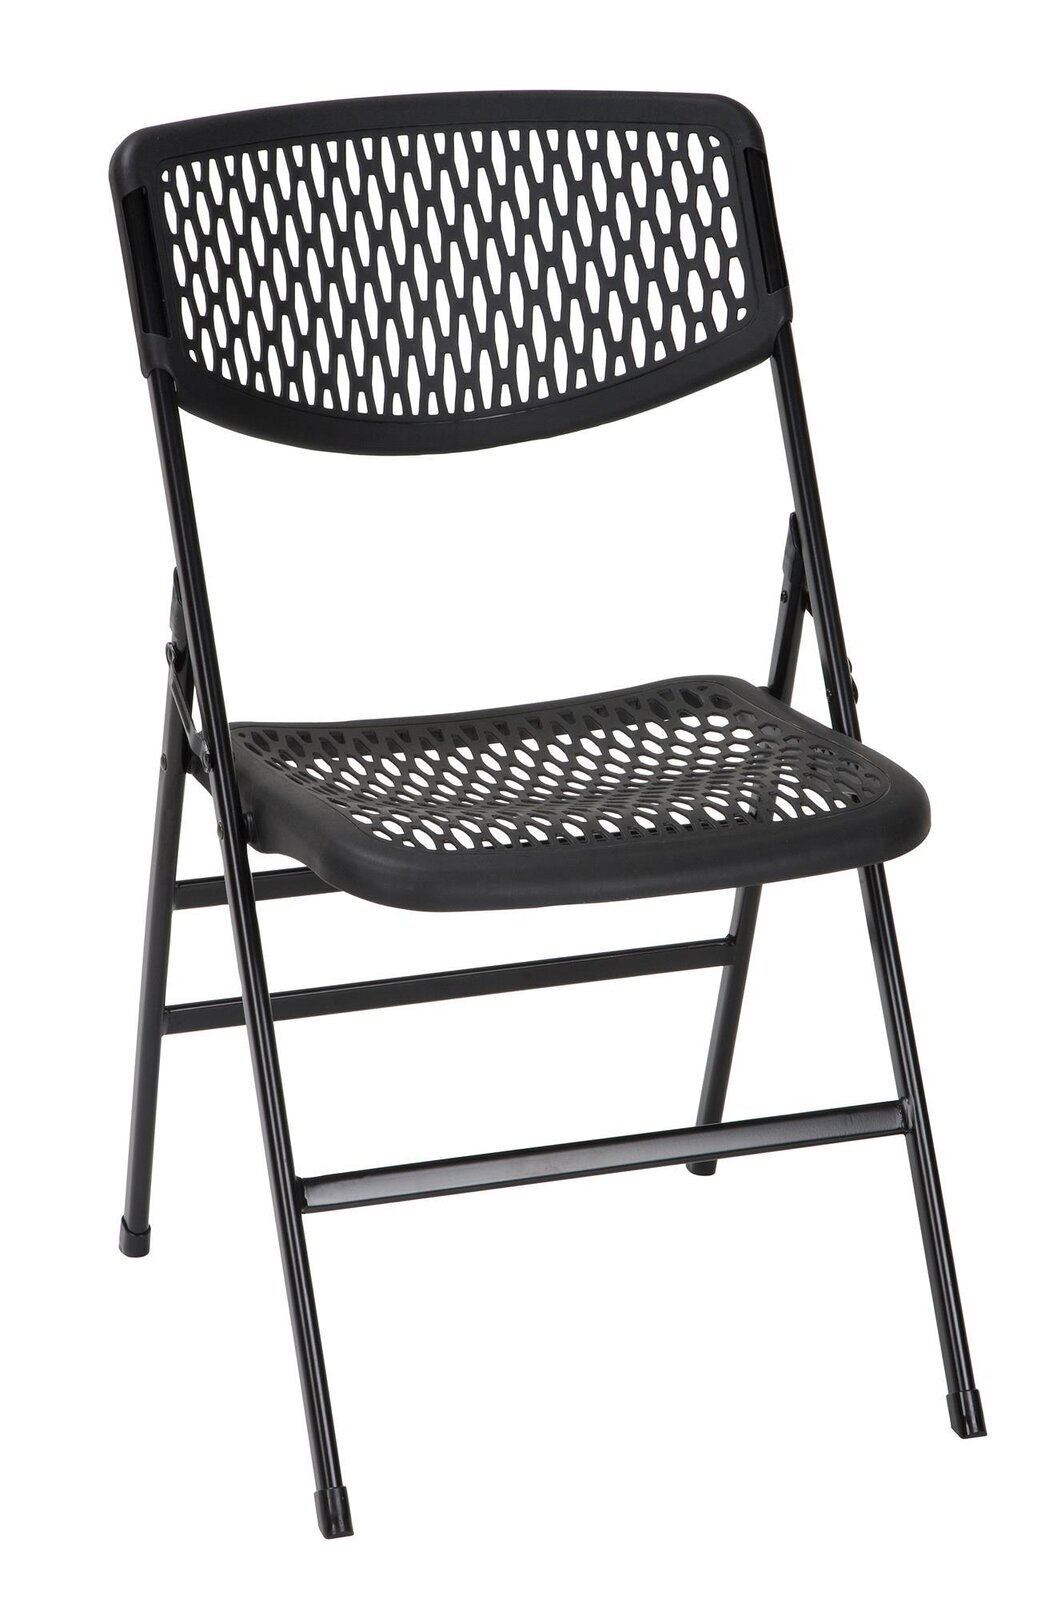 Mesh Seat and Back Vintage Folding Chairs